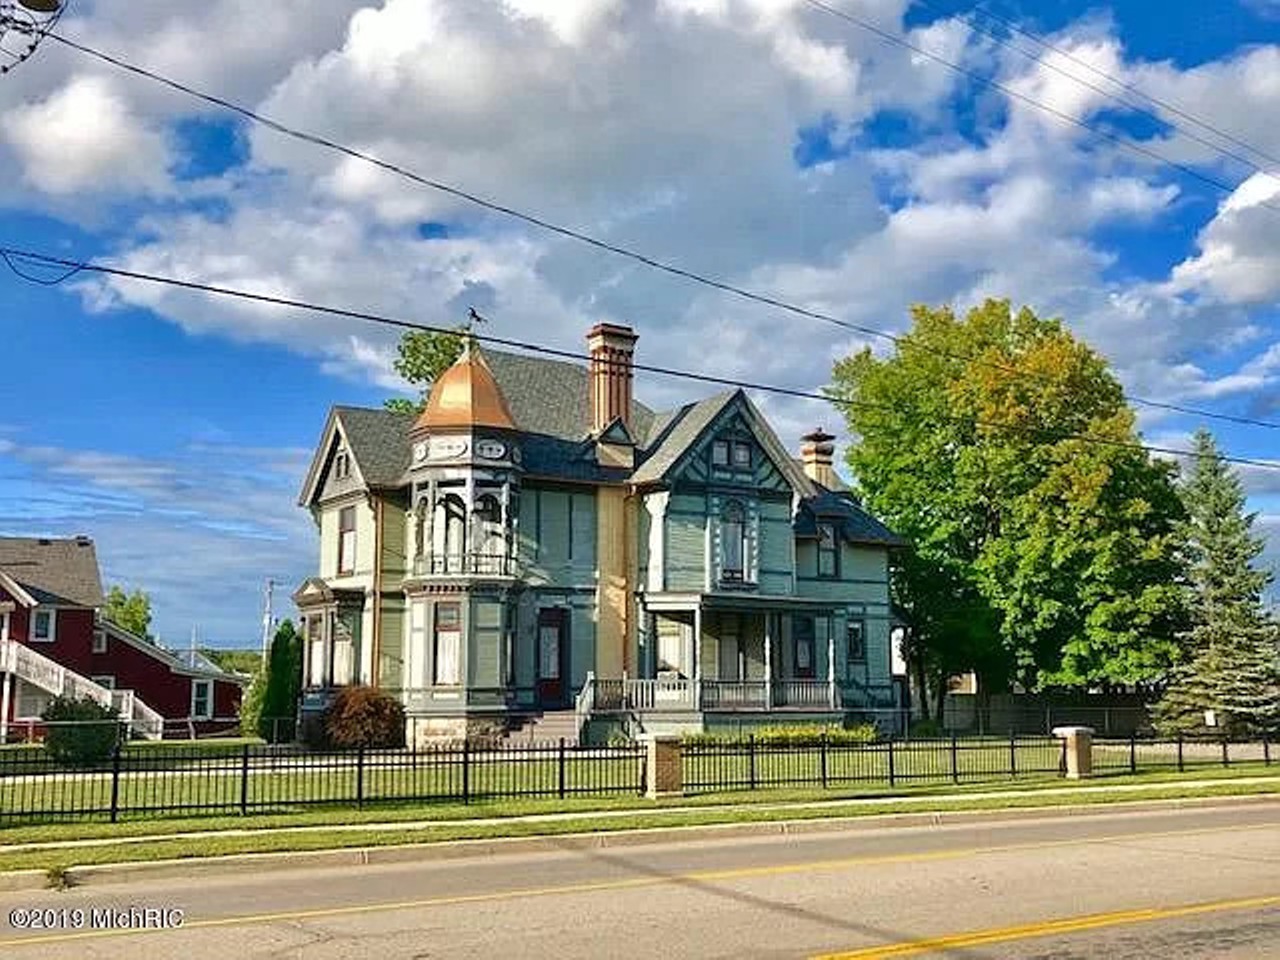 This 1885 Queen Anne House for sale was built by former Michigan Secretary of State Daniel Striker